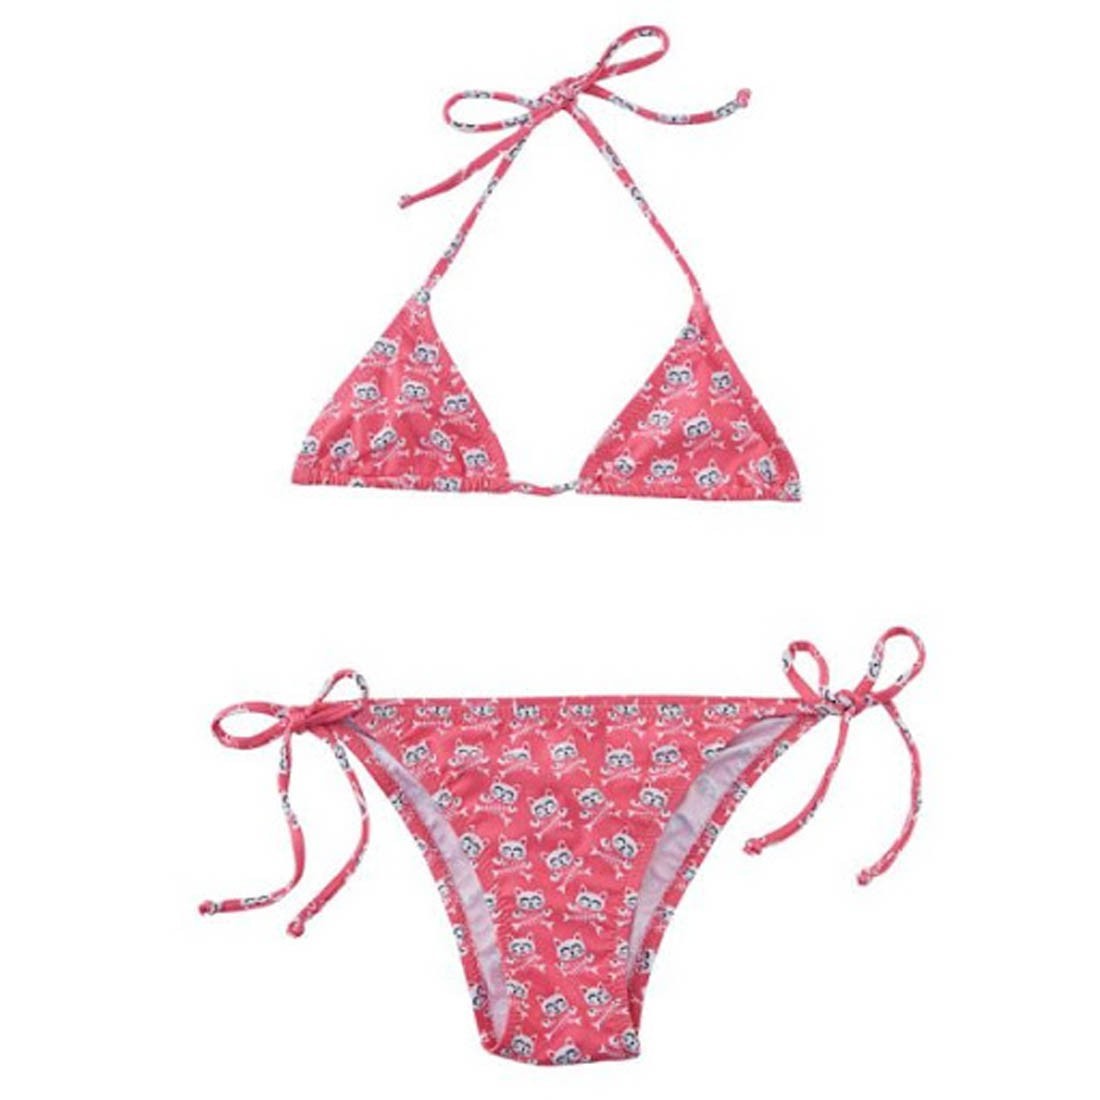 Buy SlipStop Yummy Bikini - SlipStop, delivered to your home | TheOutfit